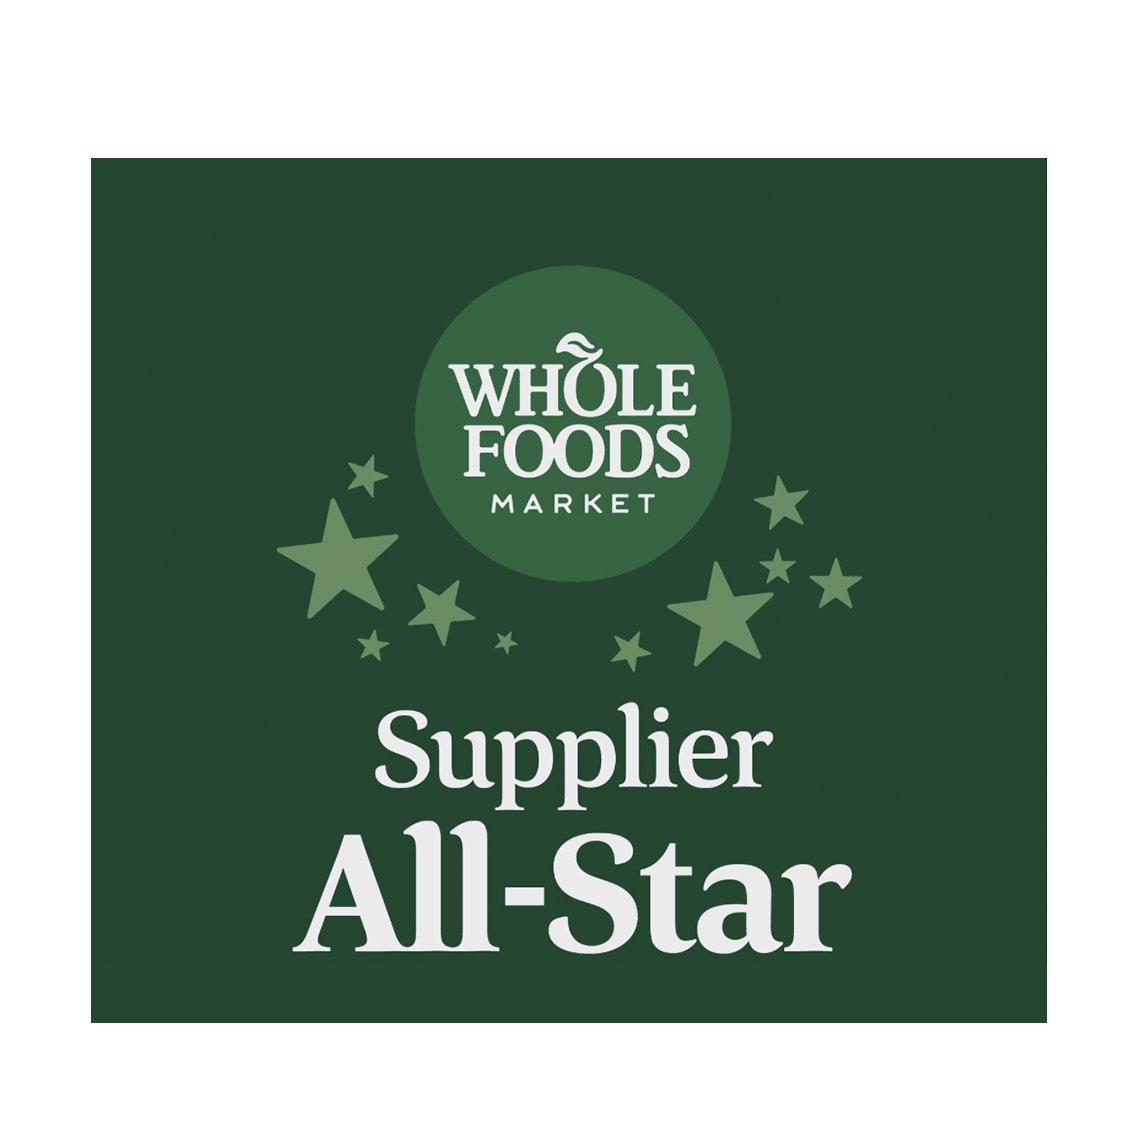 We are so excited to announce we have been selected as one of the All-Star Suppliers of 2023 for Whole Foods Market! Check out the press release here: labelle-patrimoine.com/thenews

#HeritageChickens #PastureRaisedChicken #AirchilledChicken #betterchickenproject #grownaspromised